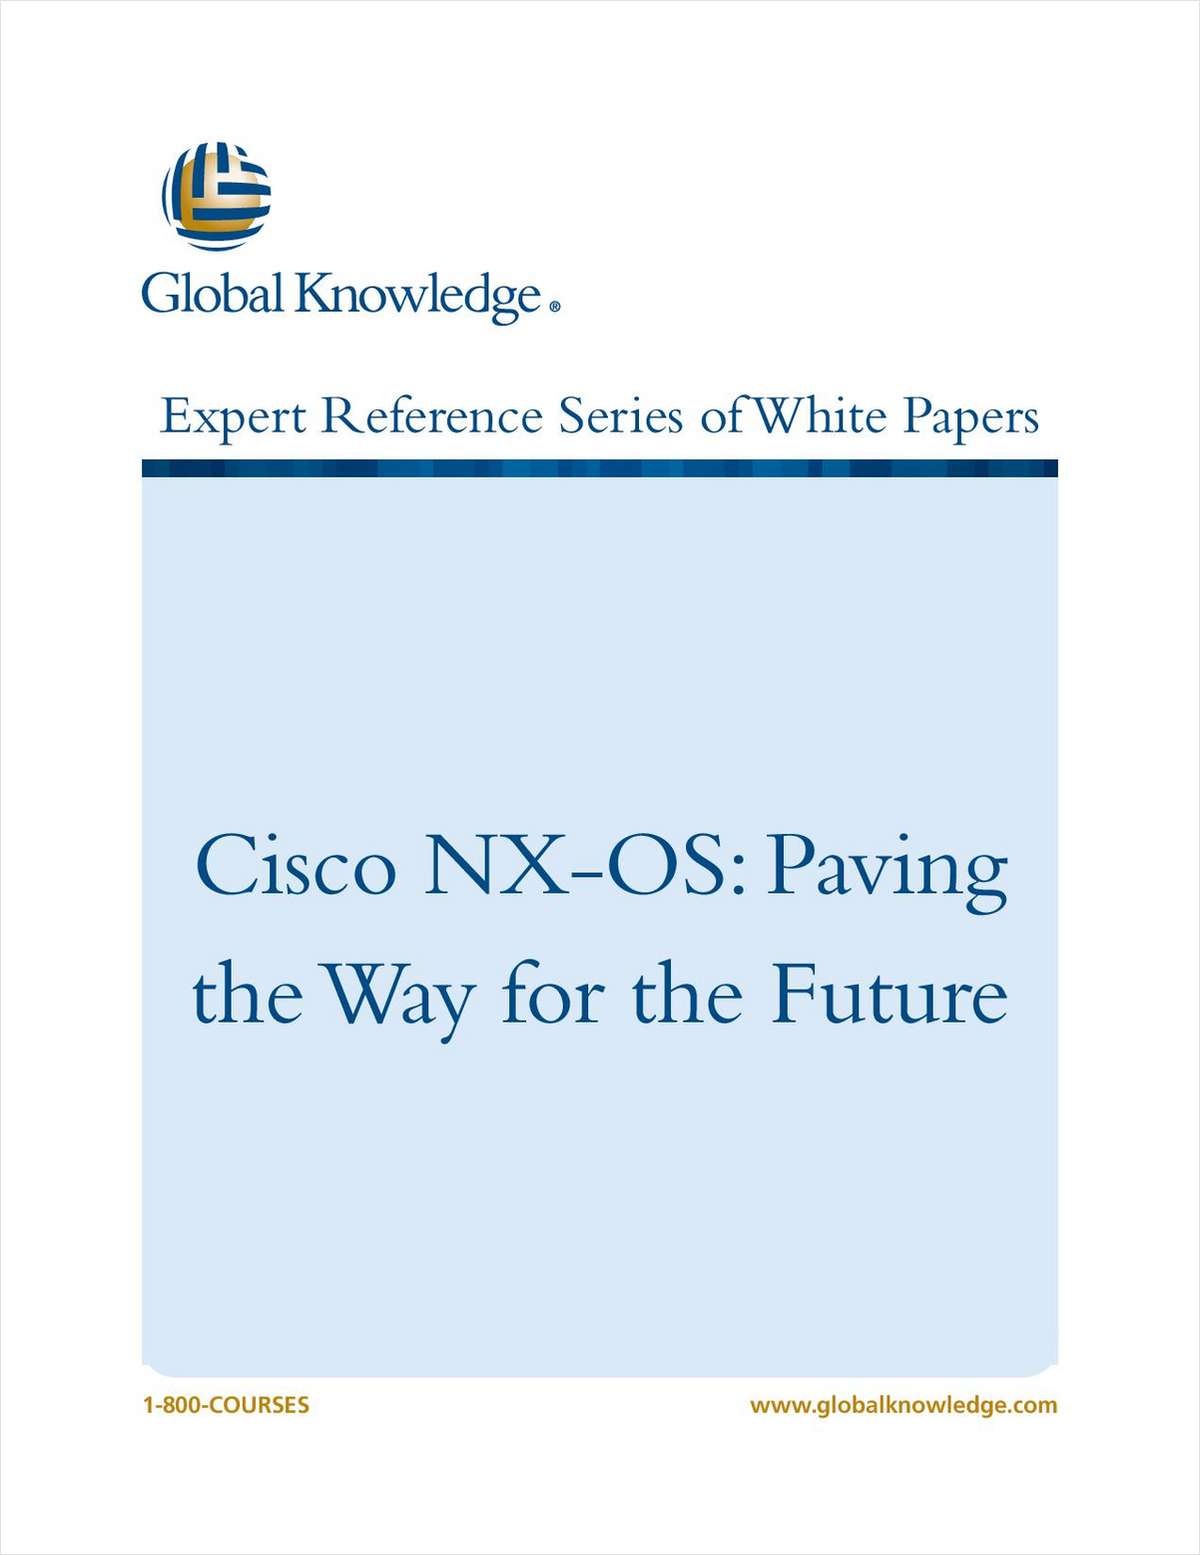 Cisco NX-OS: Paving the Way for the Future